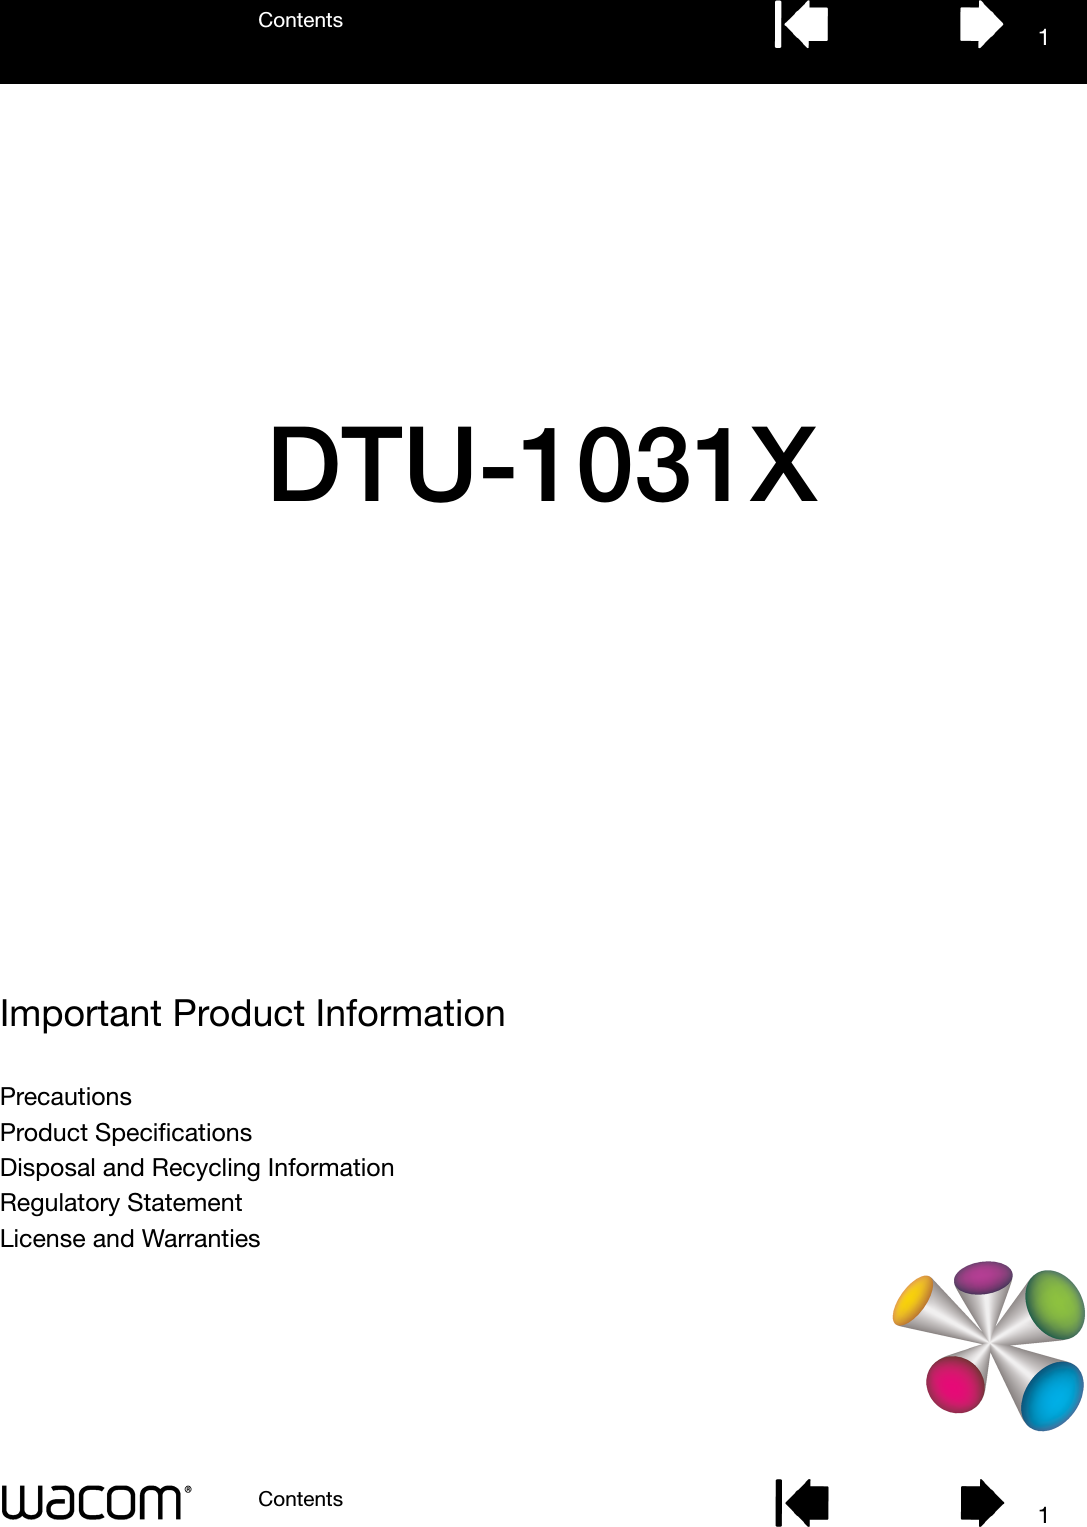 Important Product InformationContentsContents 11PrecautionsProduct Specifications Disposal and Recycling InformationRegulatory StatementLicense and WarrantiesDTU-1031X